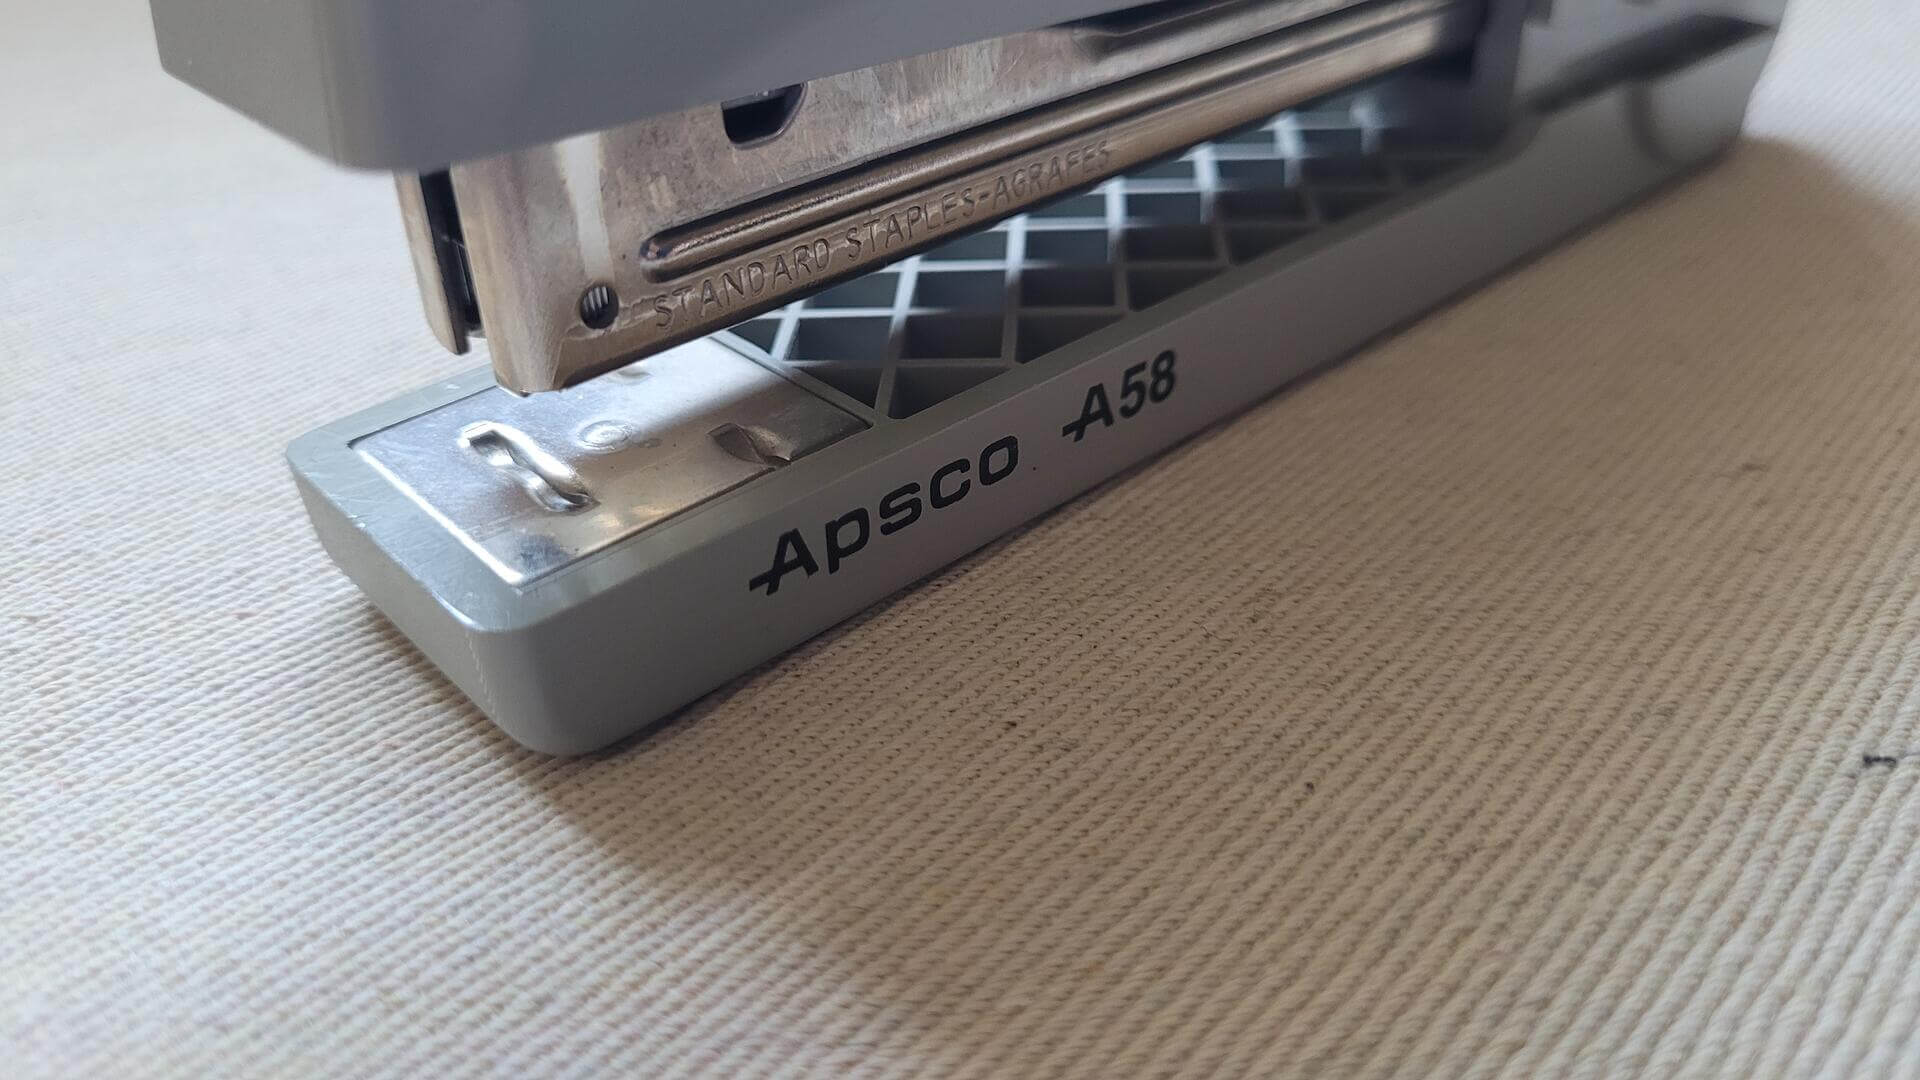 Apsco A58 Stapler Isabergs Verkstads Design Hestra - Vintage Collectible MCM Mid Century made in Sweden Indutrial and Office Equipment